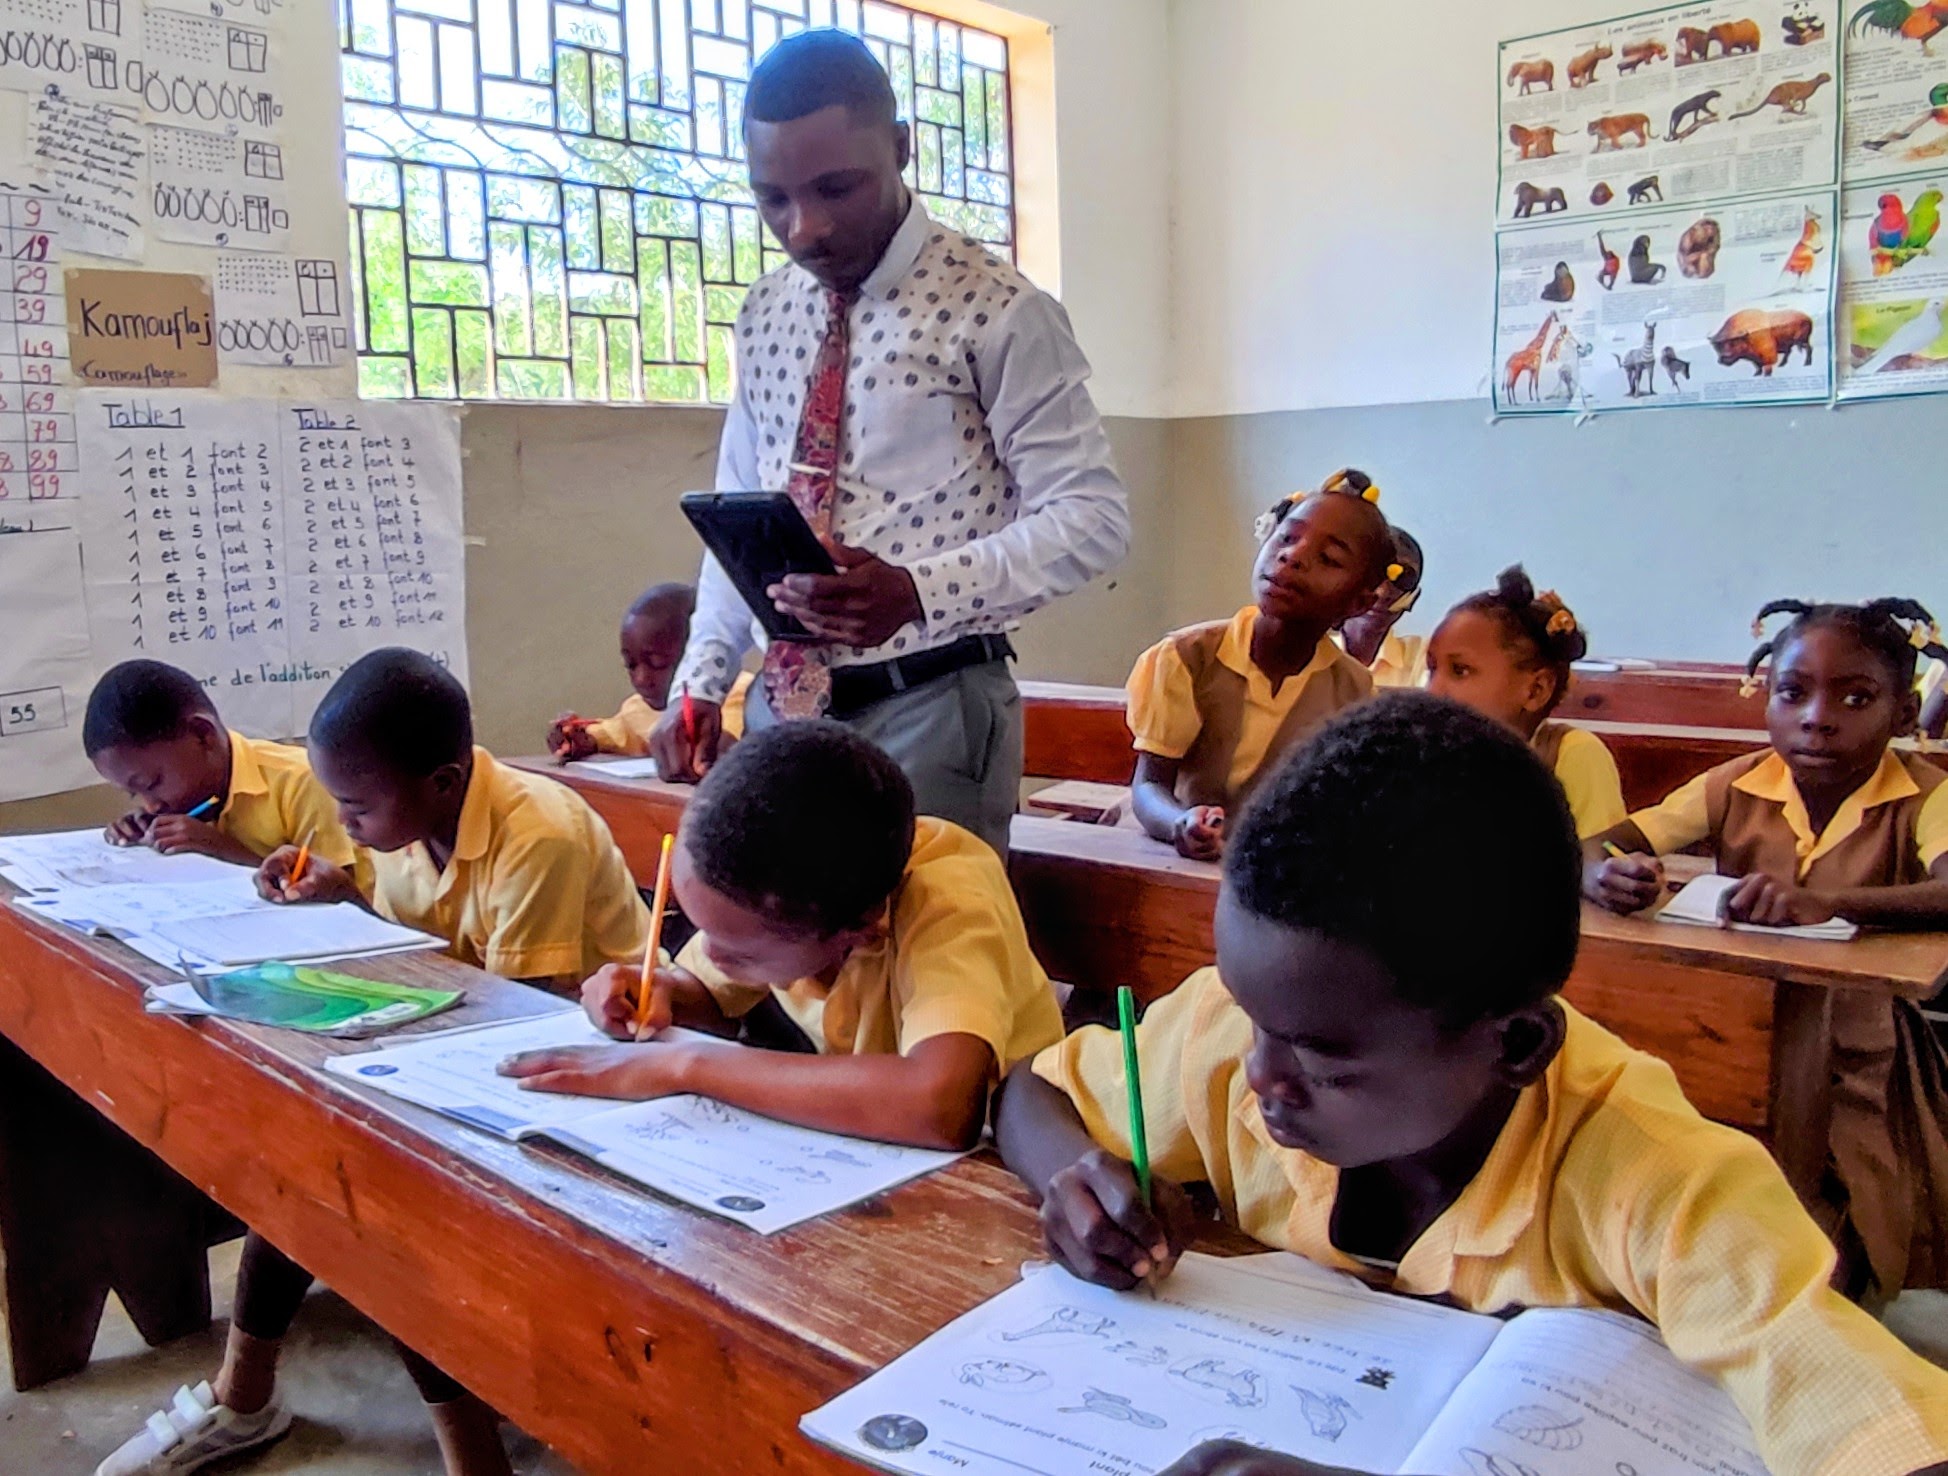 A teacher at Summits Education in Mirebalais, Haiti, works with his students on Blue Butterfly's Eksploratoryòm science education program.